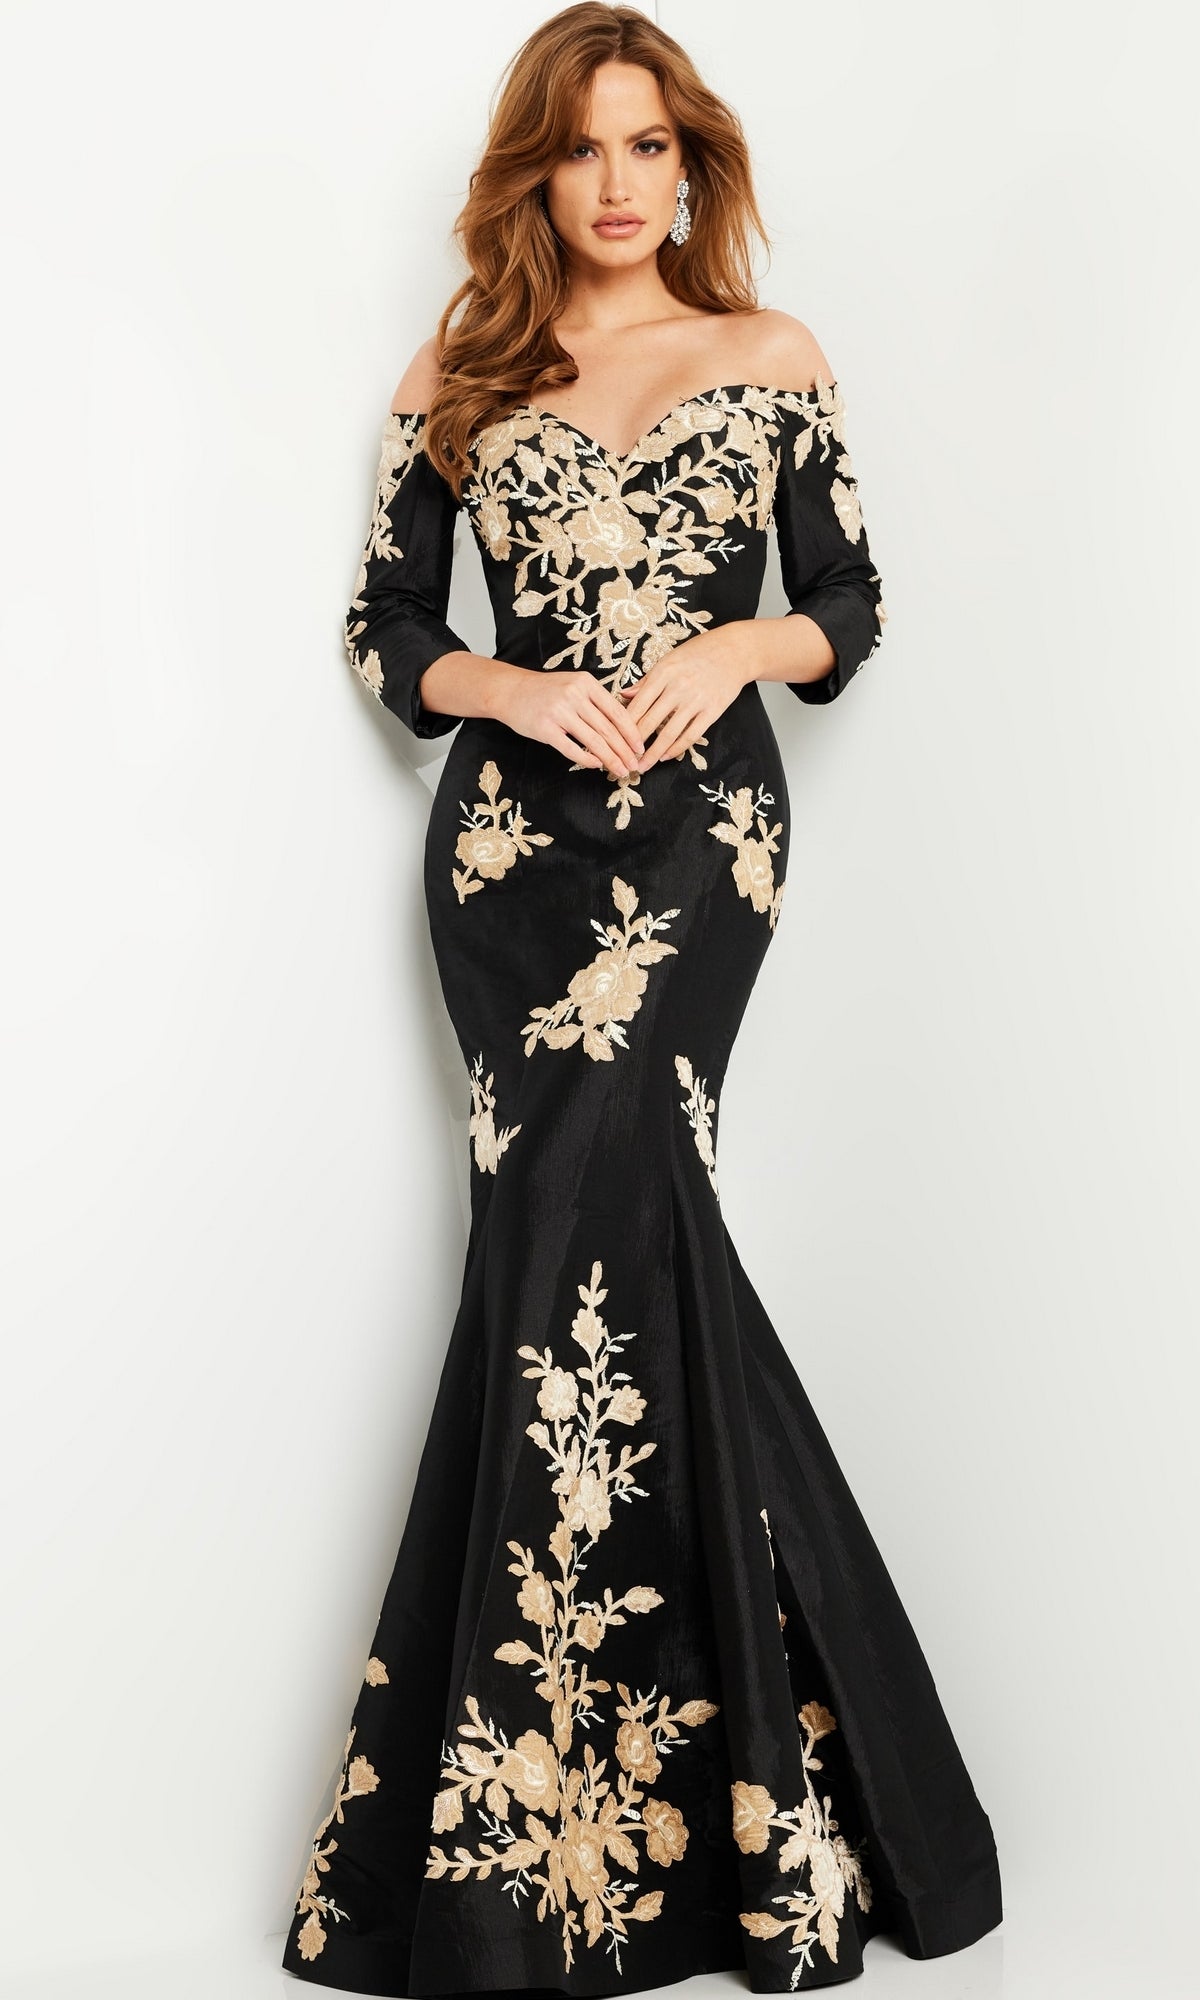 Black Mermaid Formal Gown 24327 with Gold Flowers